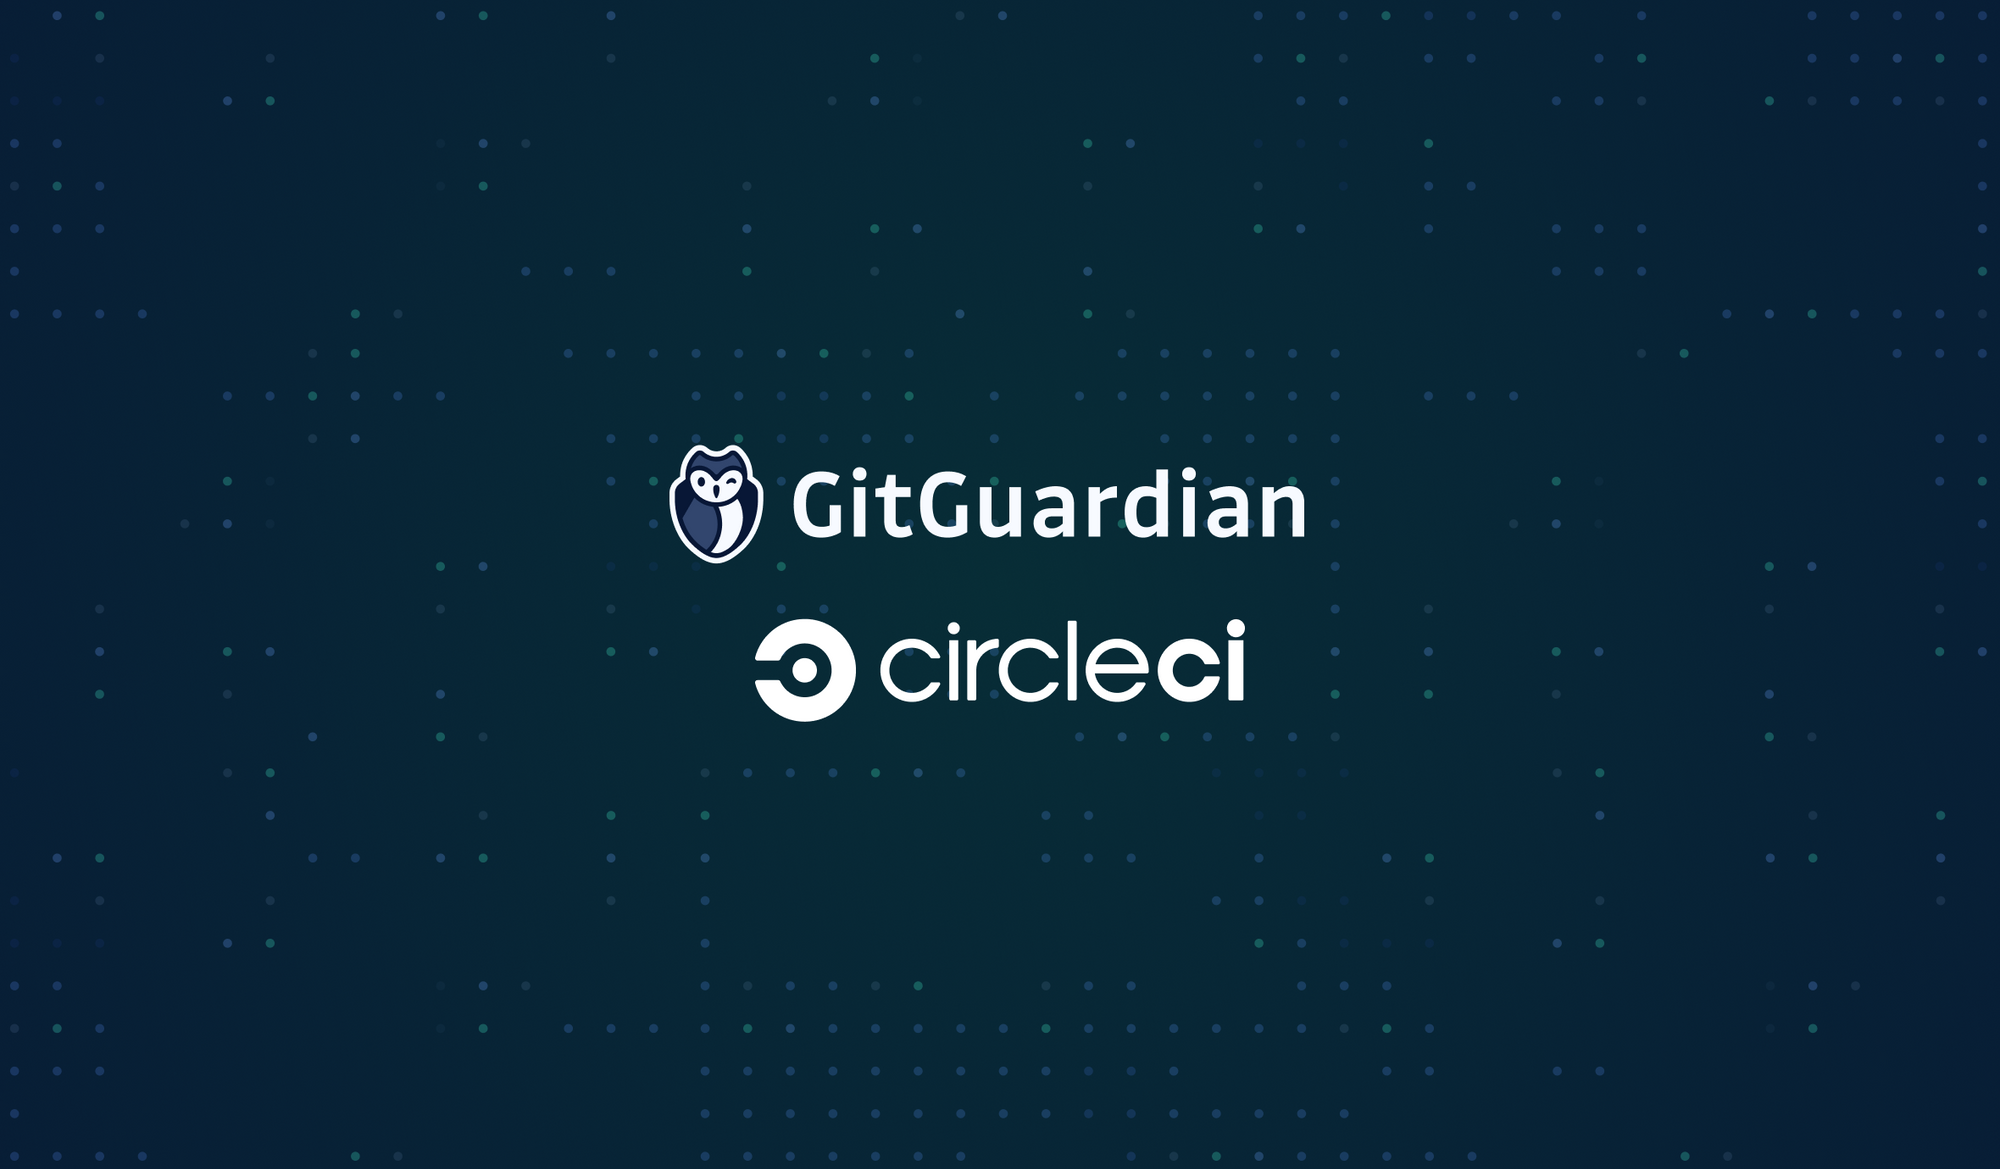 Automate security testing in your CI pipelines with GitGuardian and CircleCI